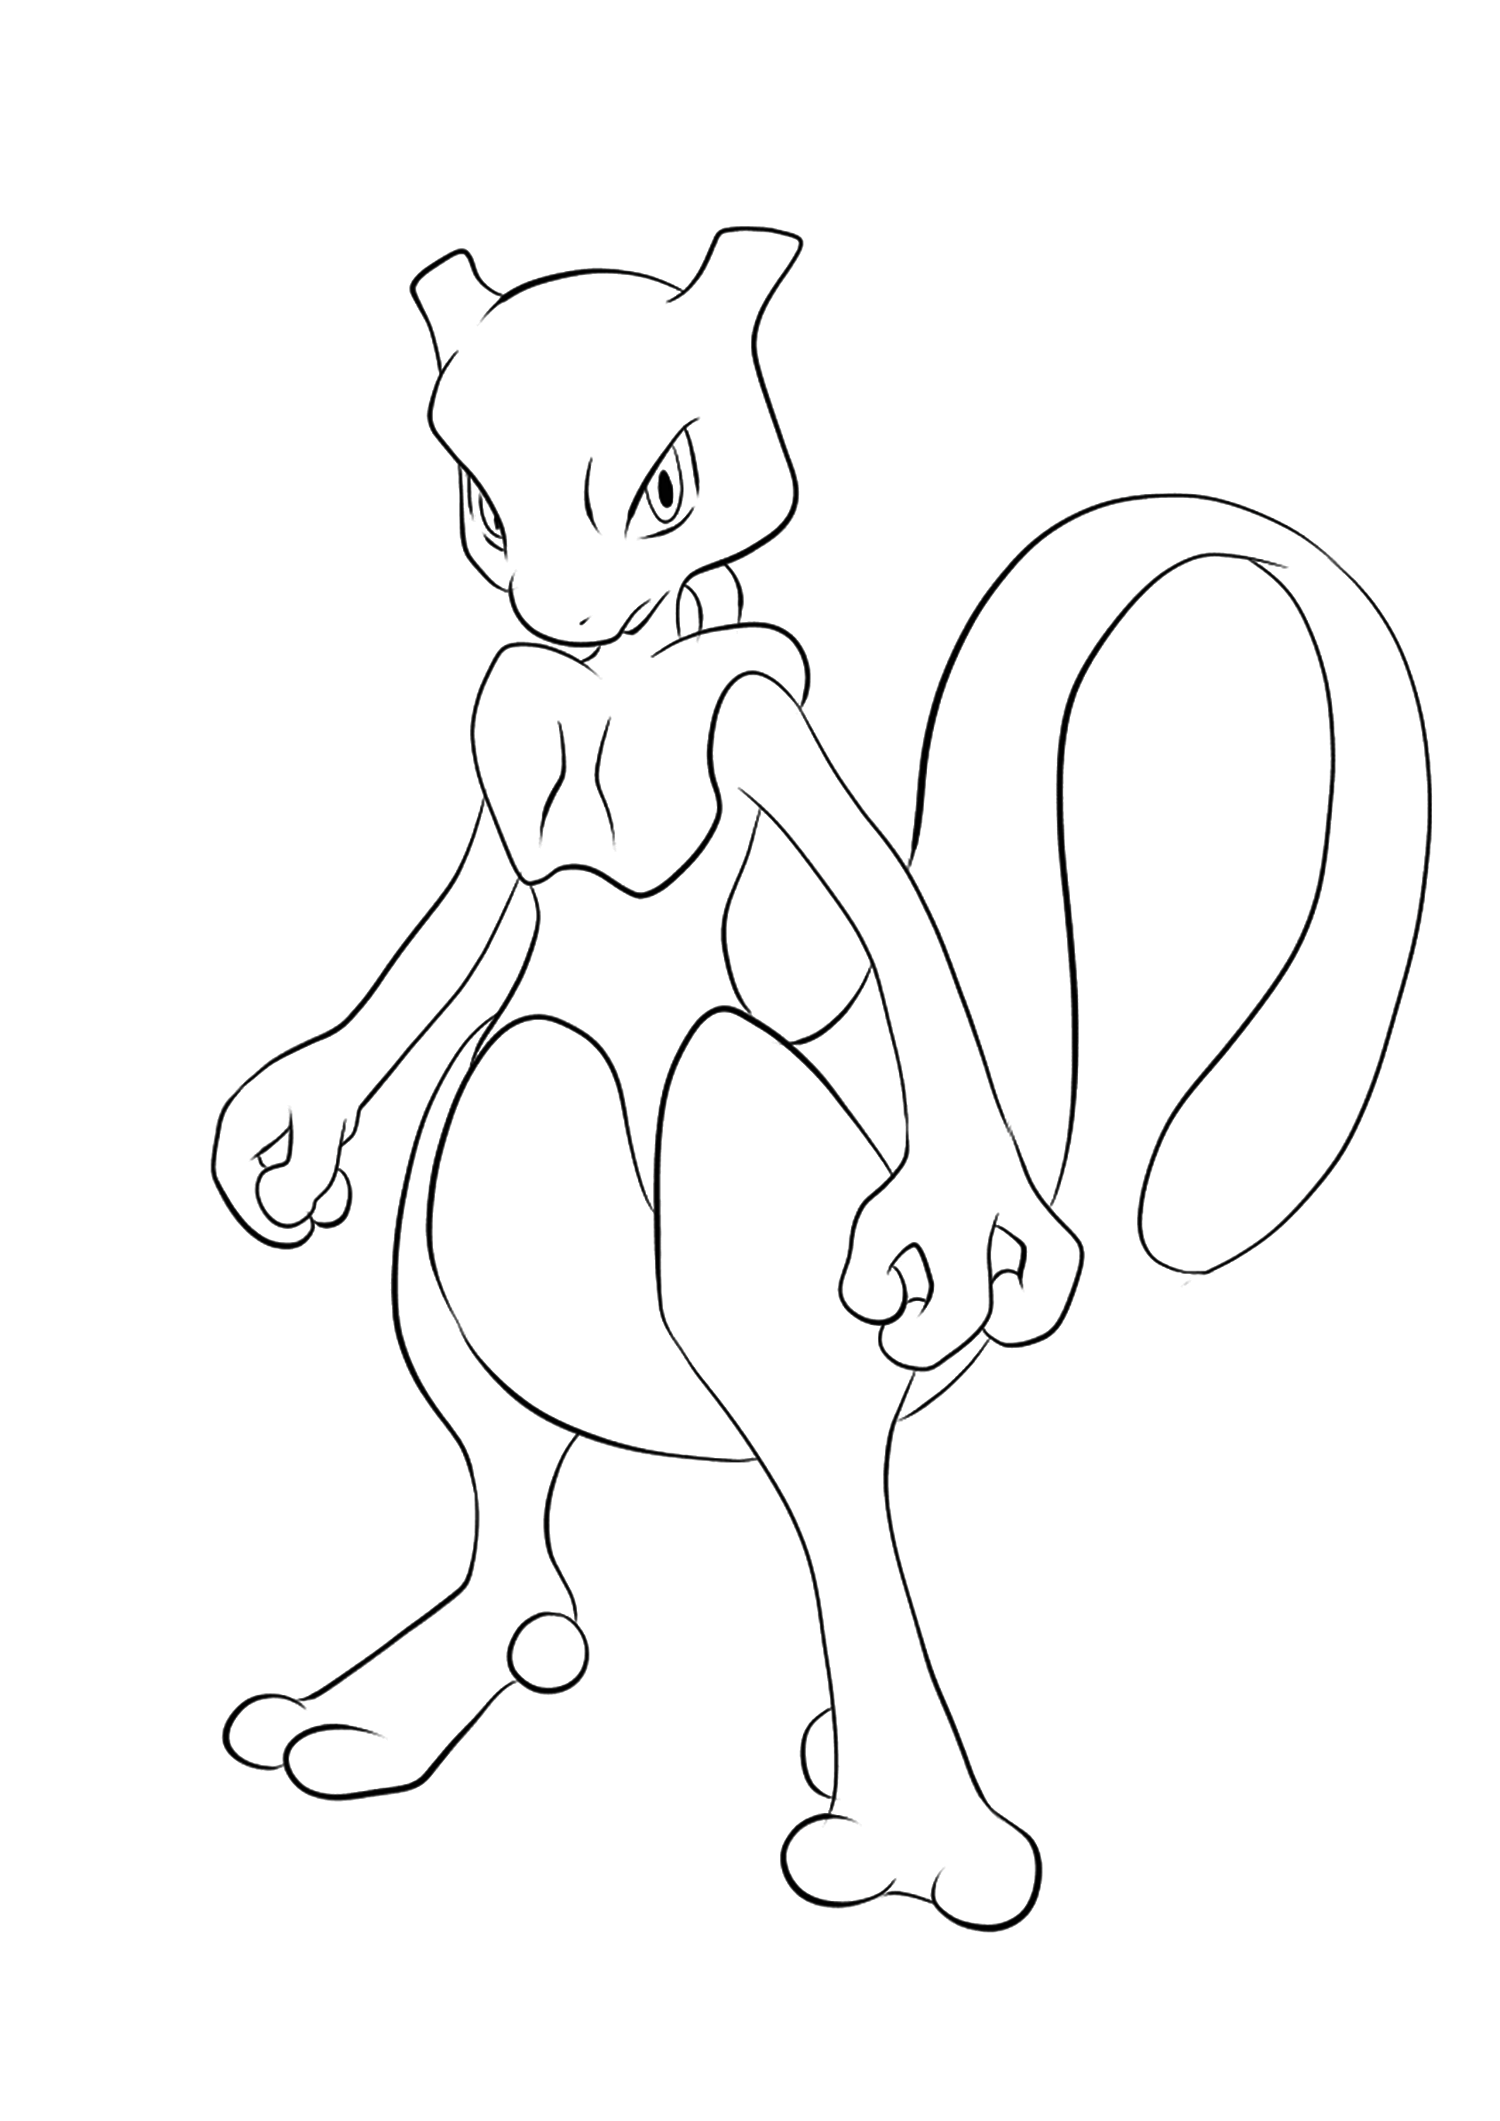 Mewtwo Coloring Page Homeicon Info